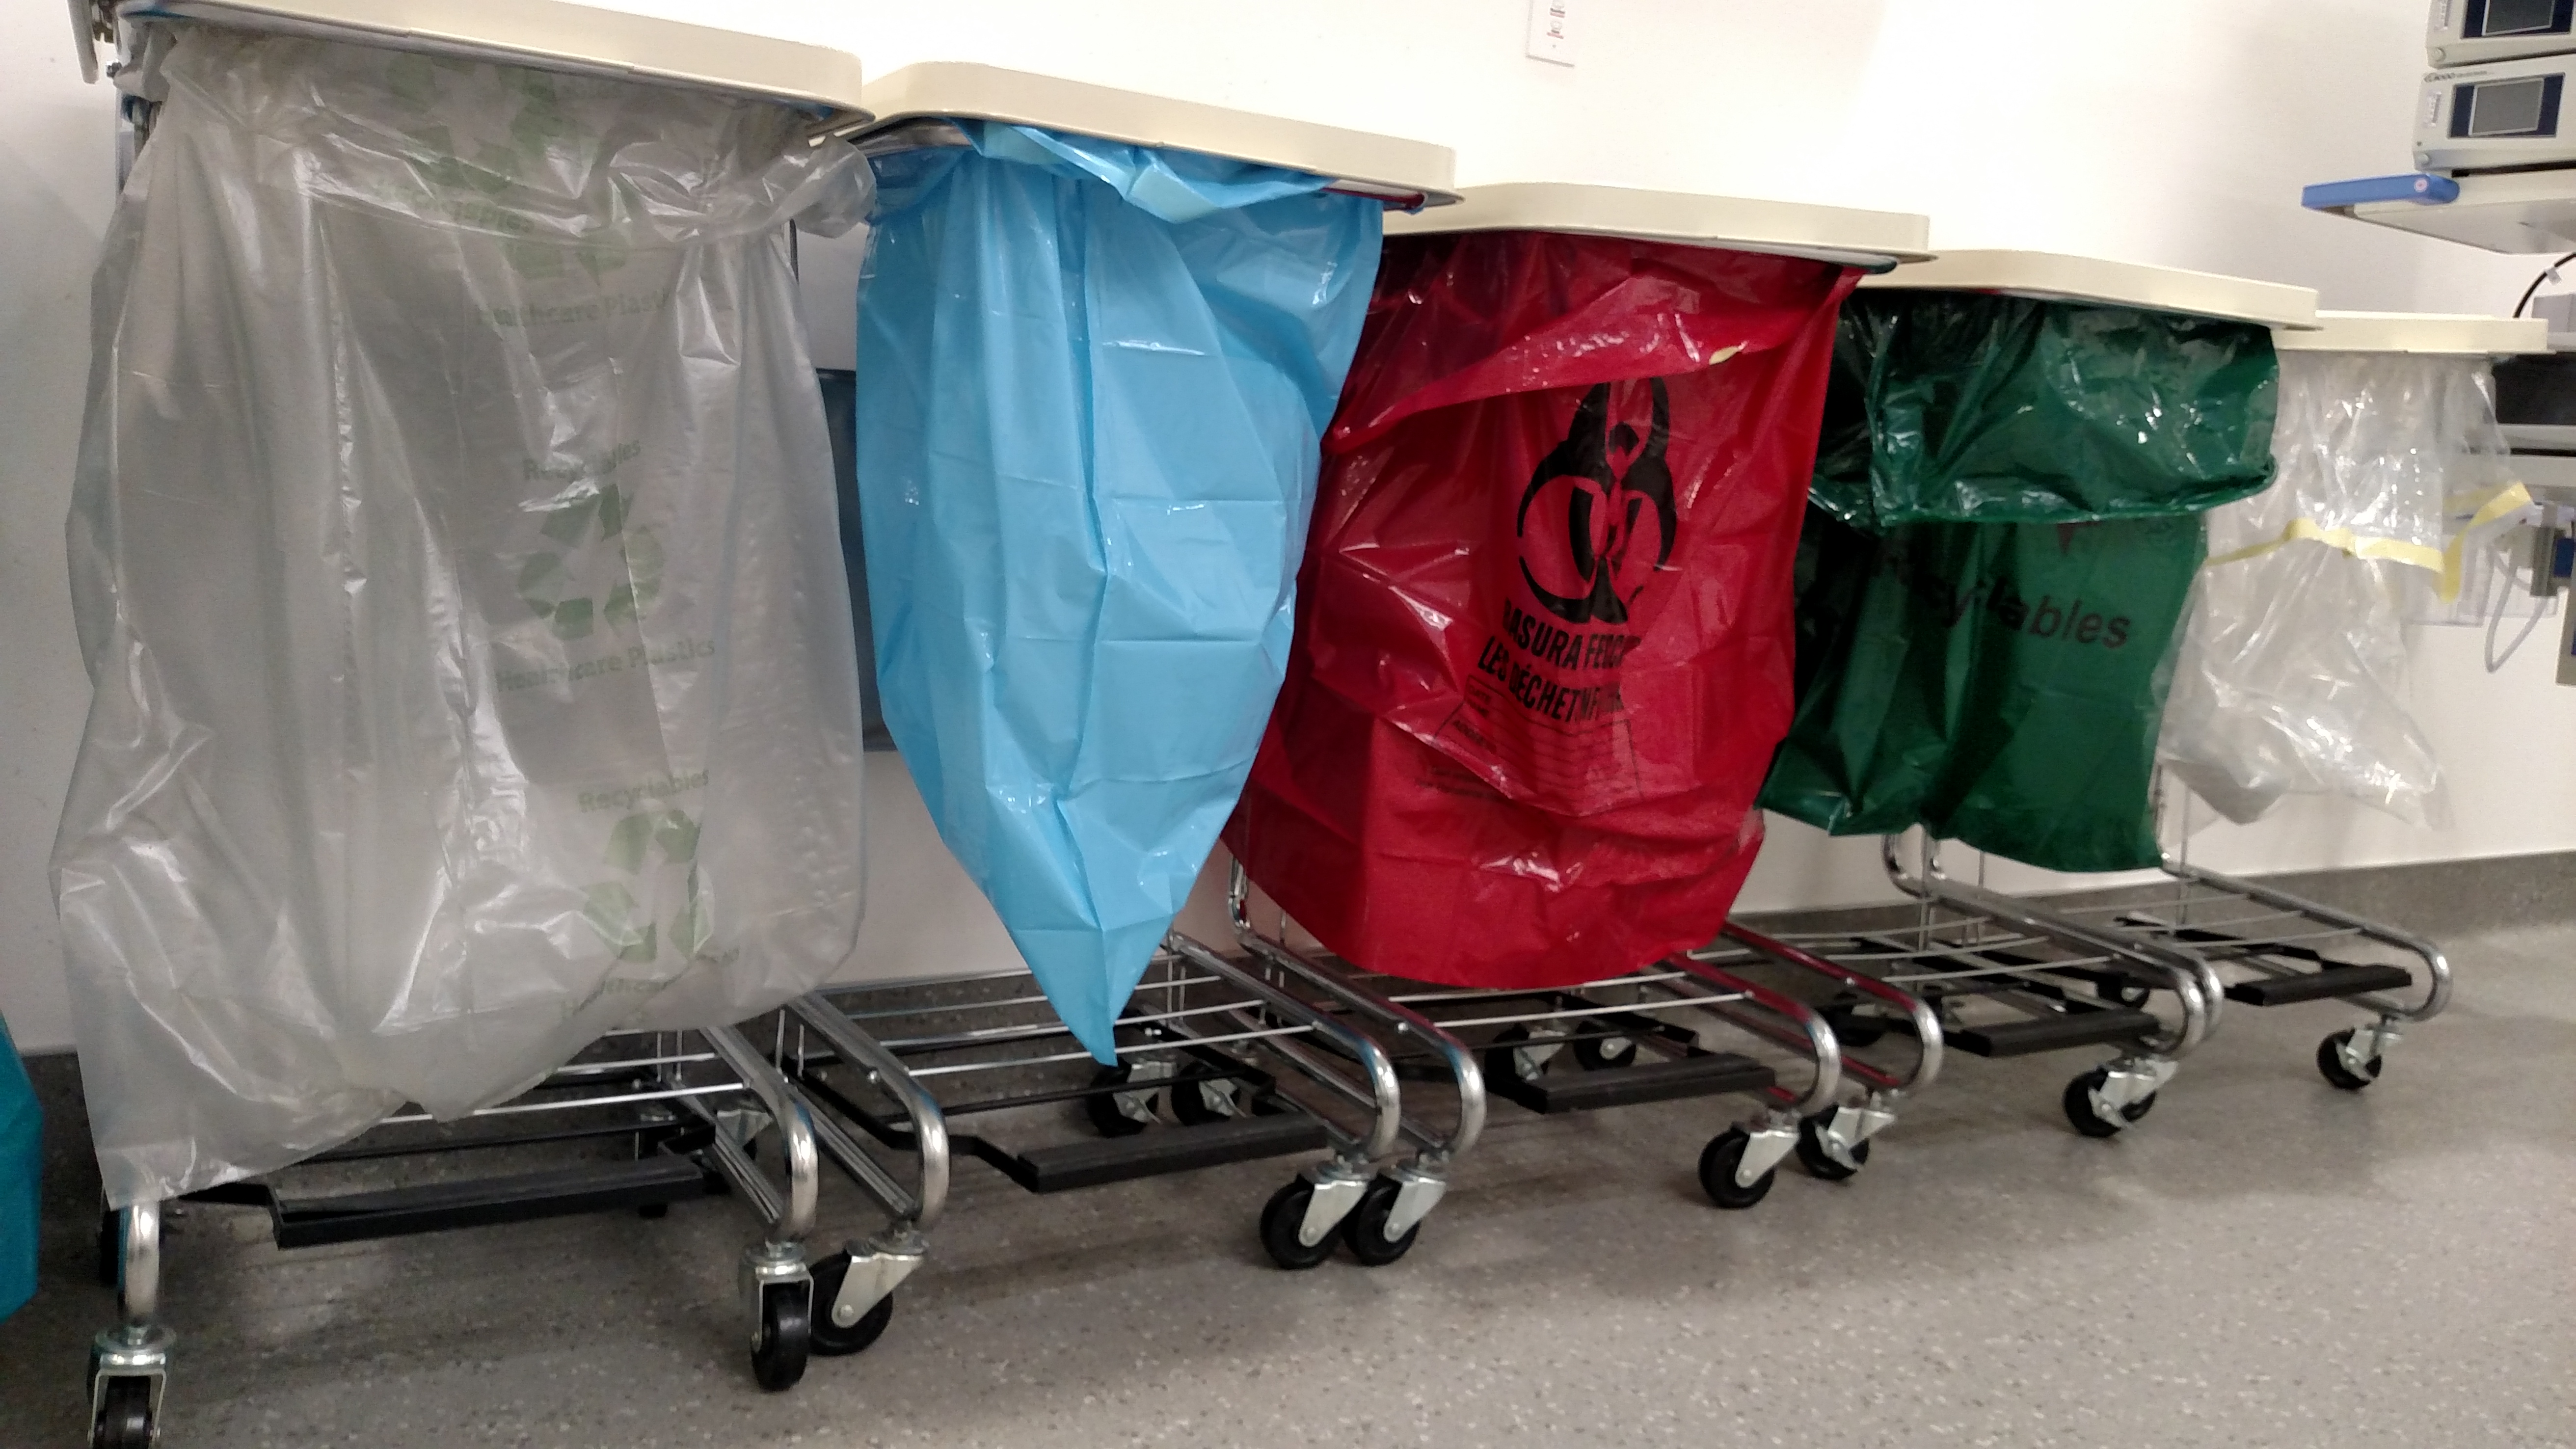 HPRC and PLASTICS Launch Major Multi-Hospital Recycling Pilot in Chicago